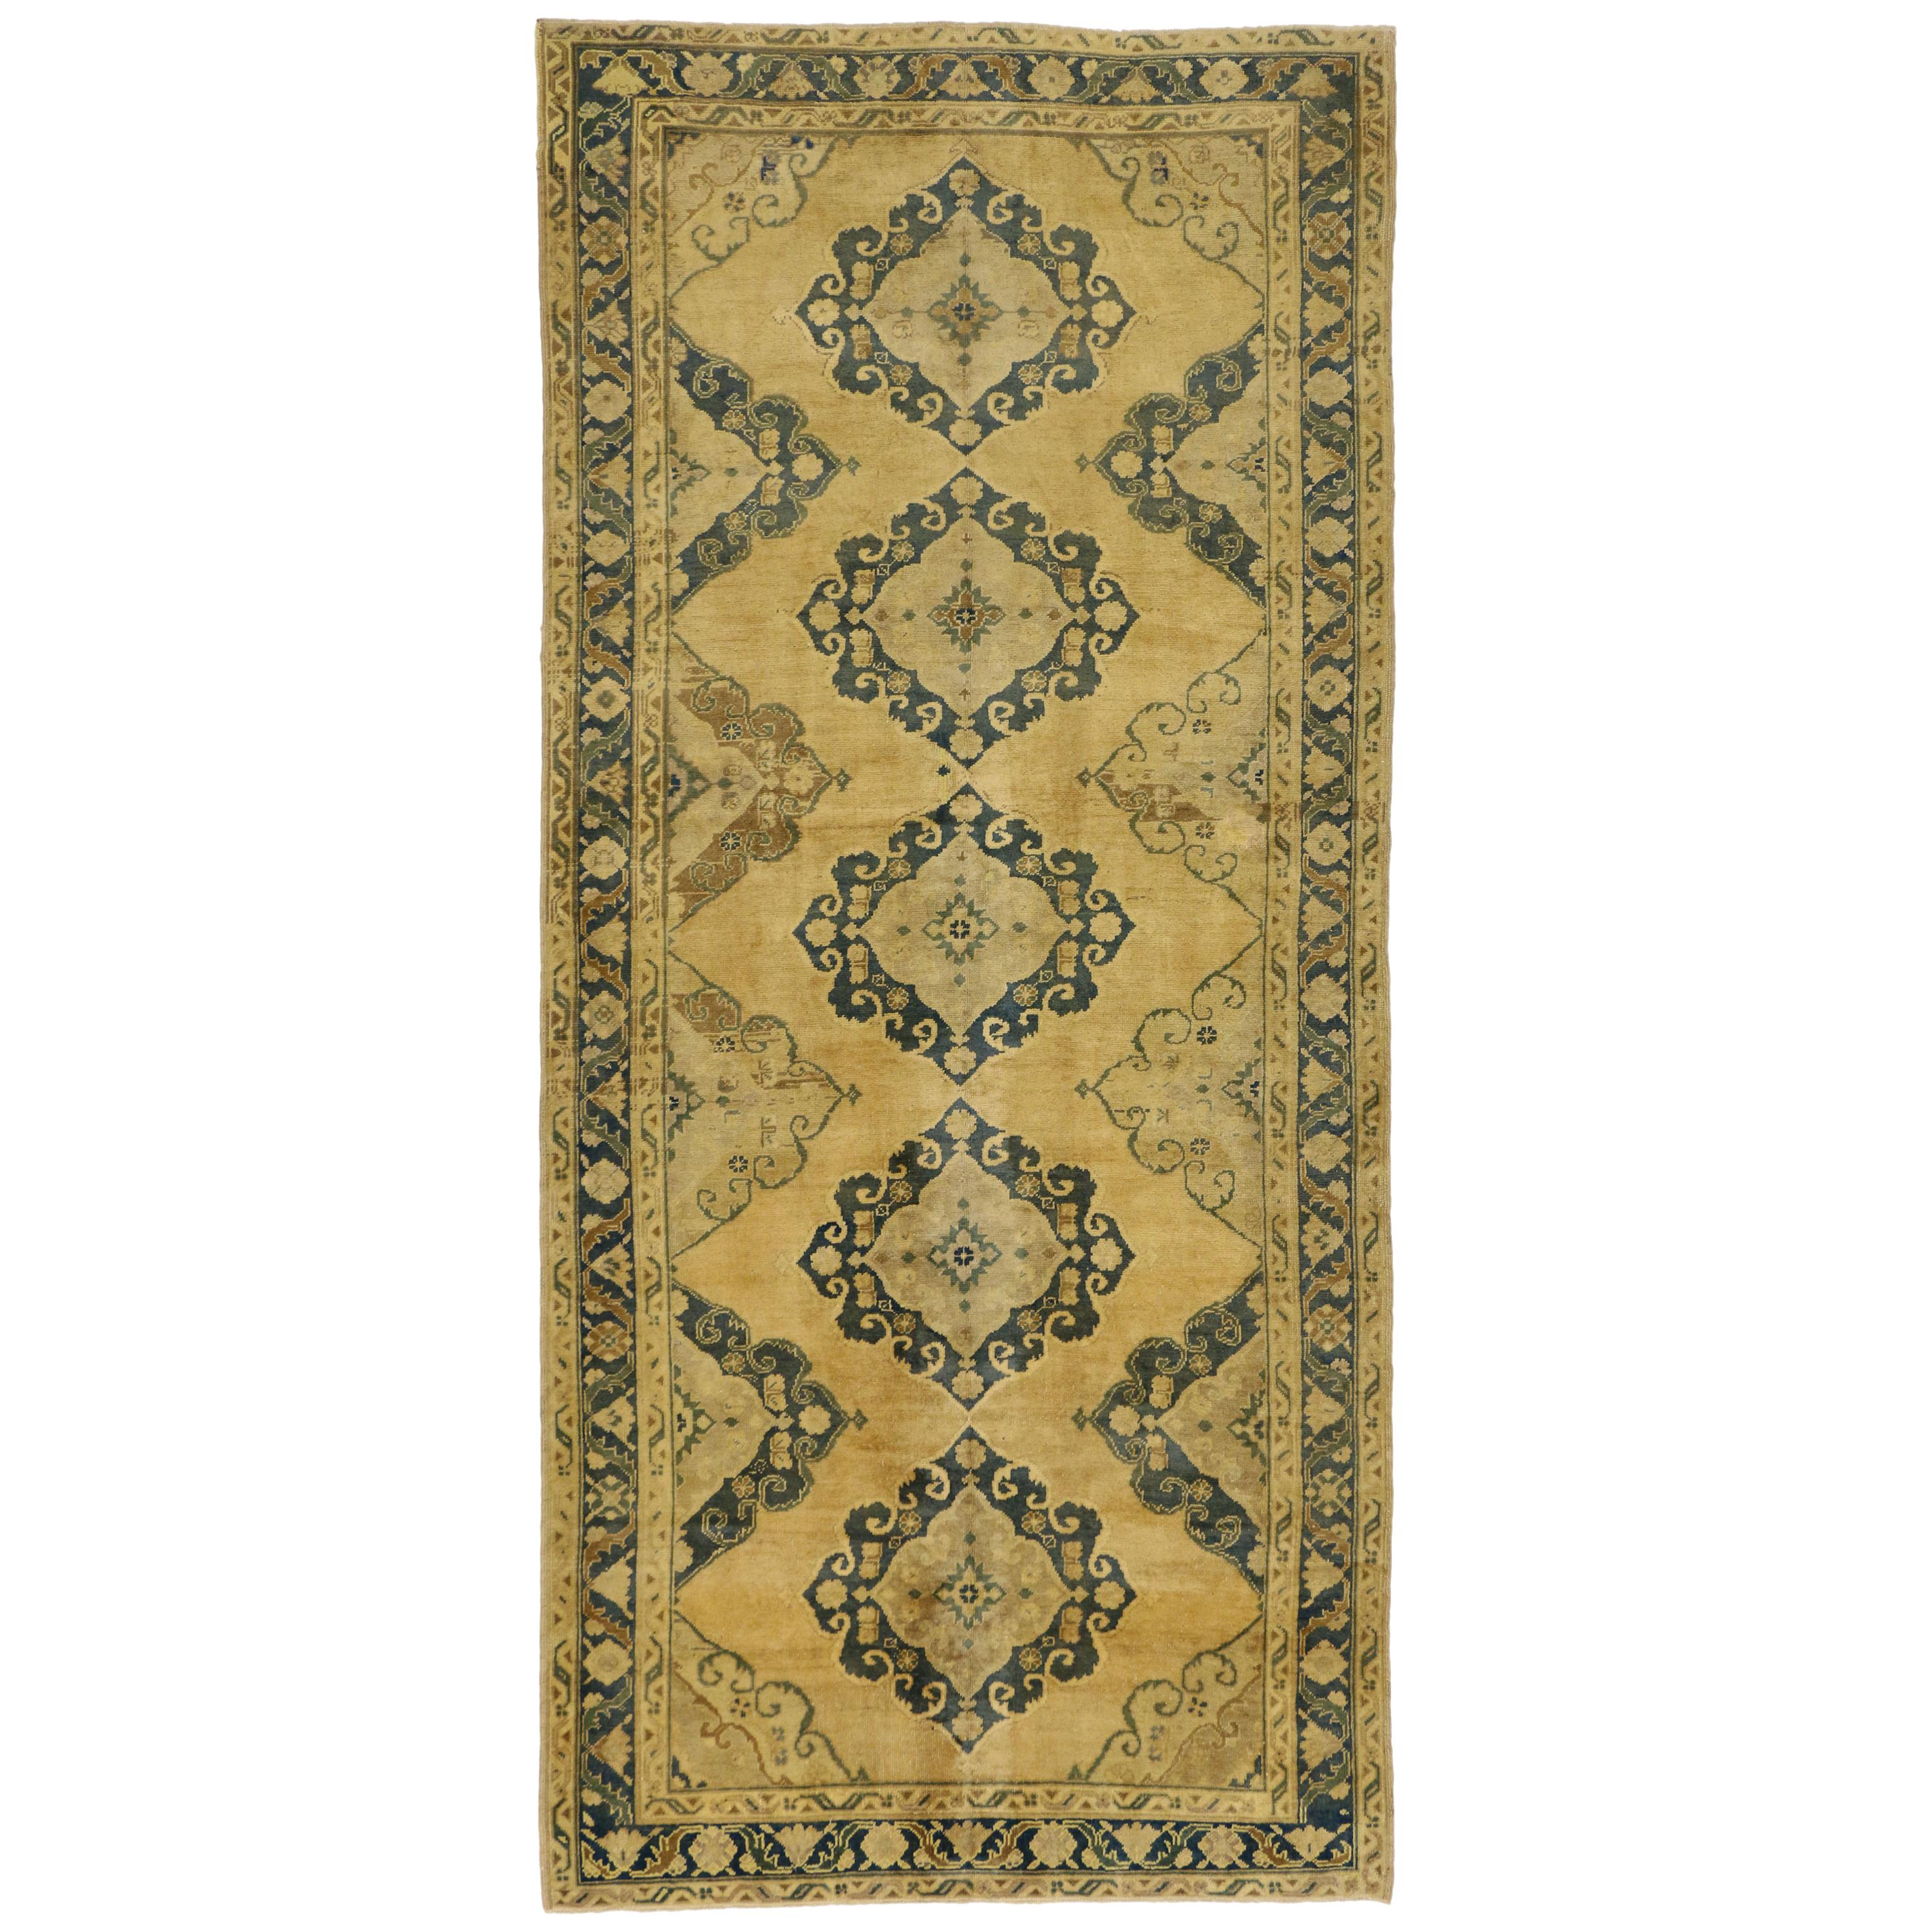 Vintage Turkish Oushak Gallery Rug with Neoclassic Style, Wide Hallway Runner